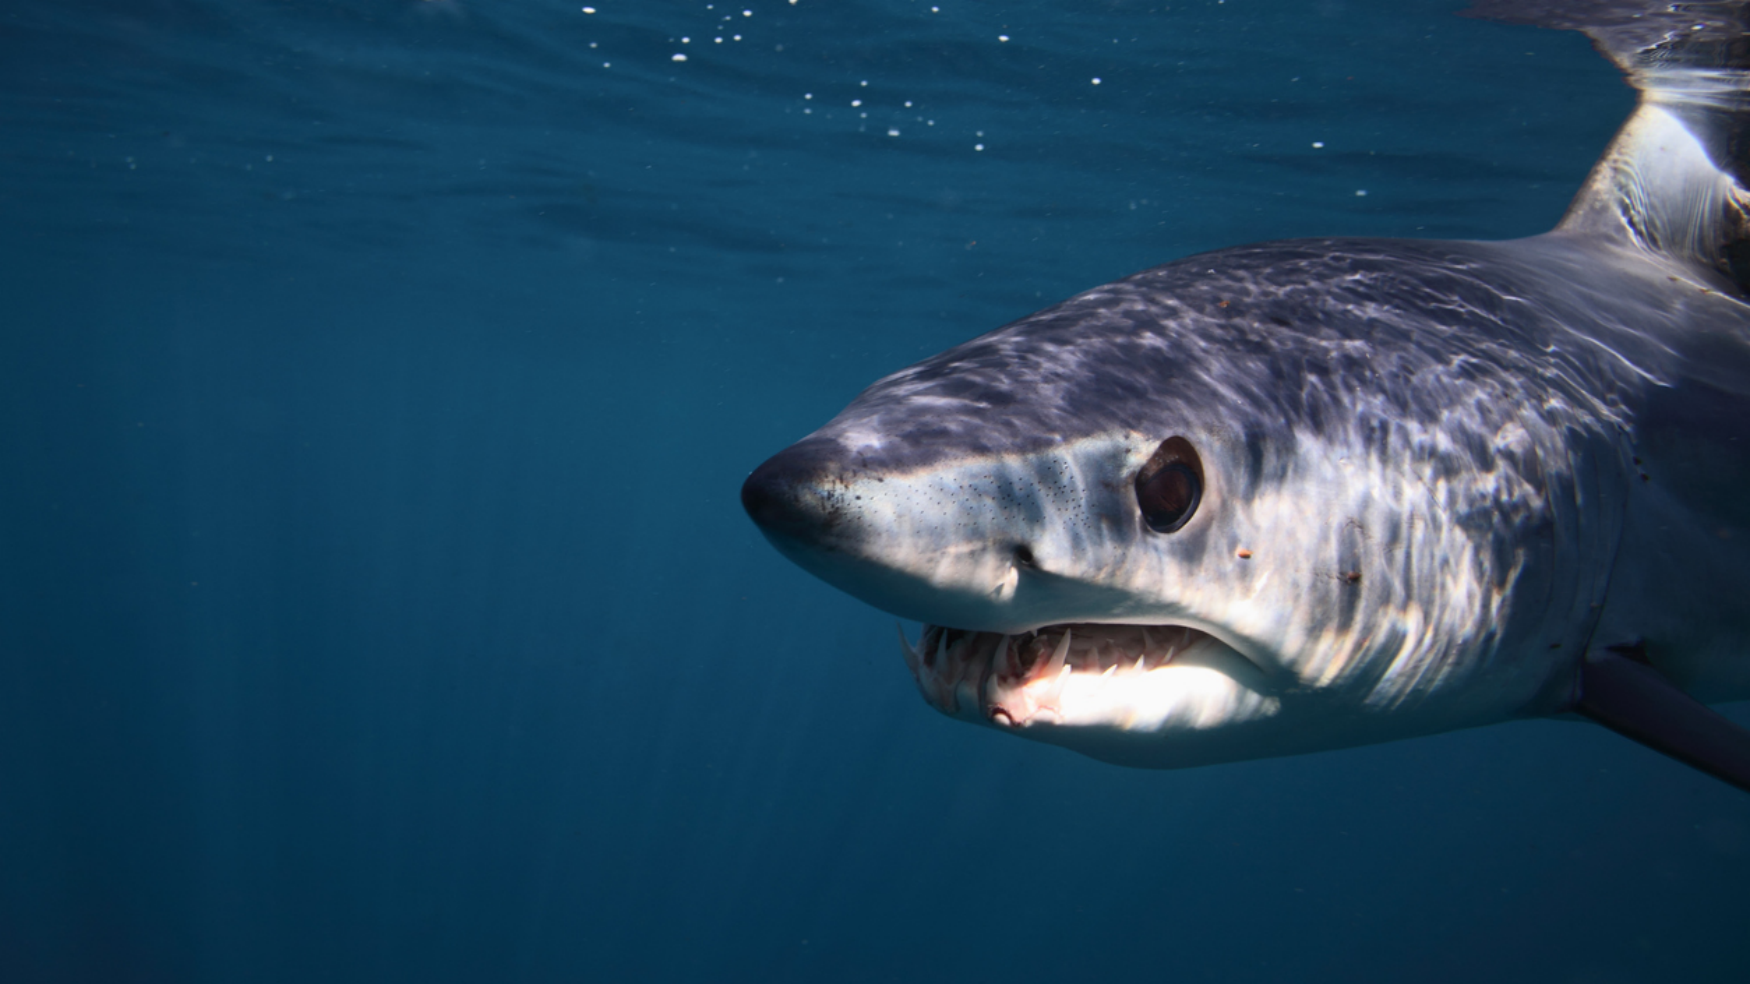 Diver Captures Exact Moment A Mako Shark Attacked Him While He Was Coming Up To Breathe